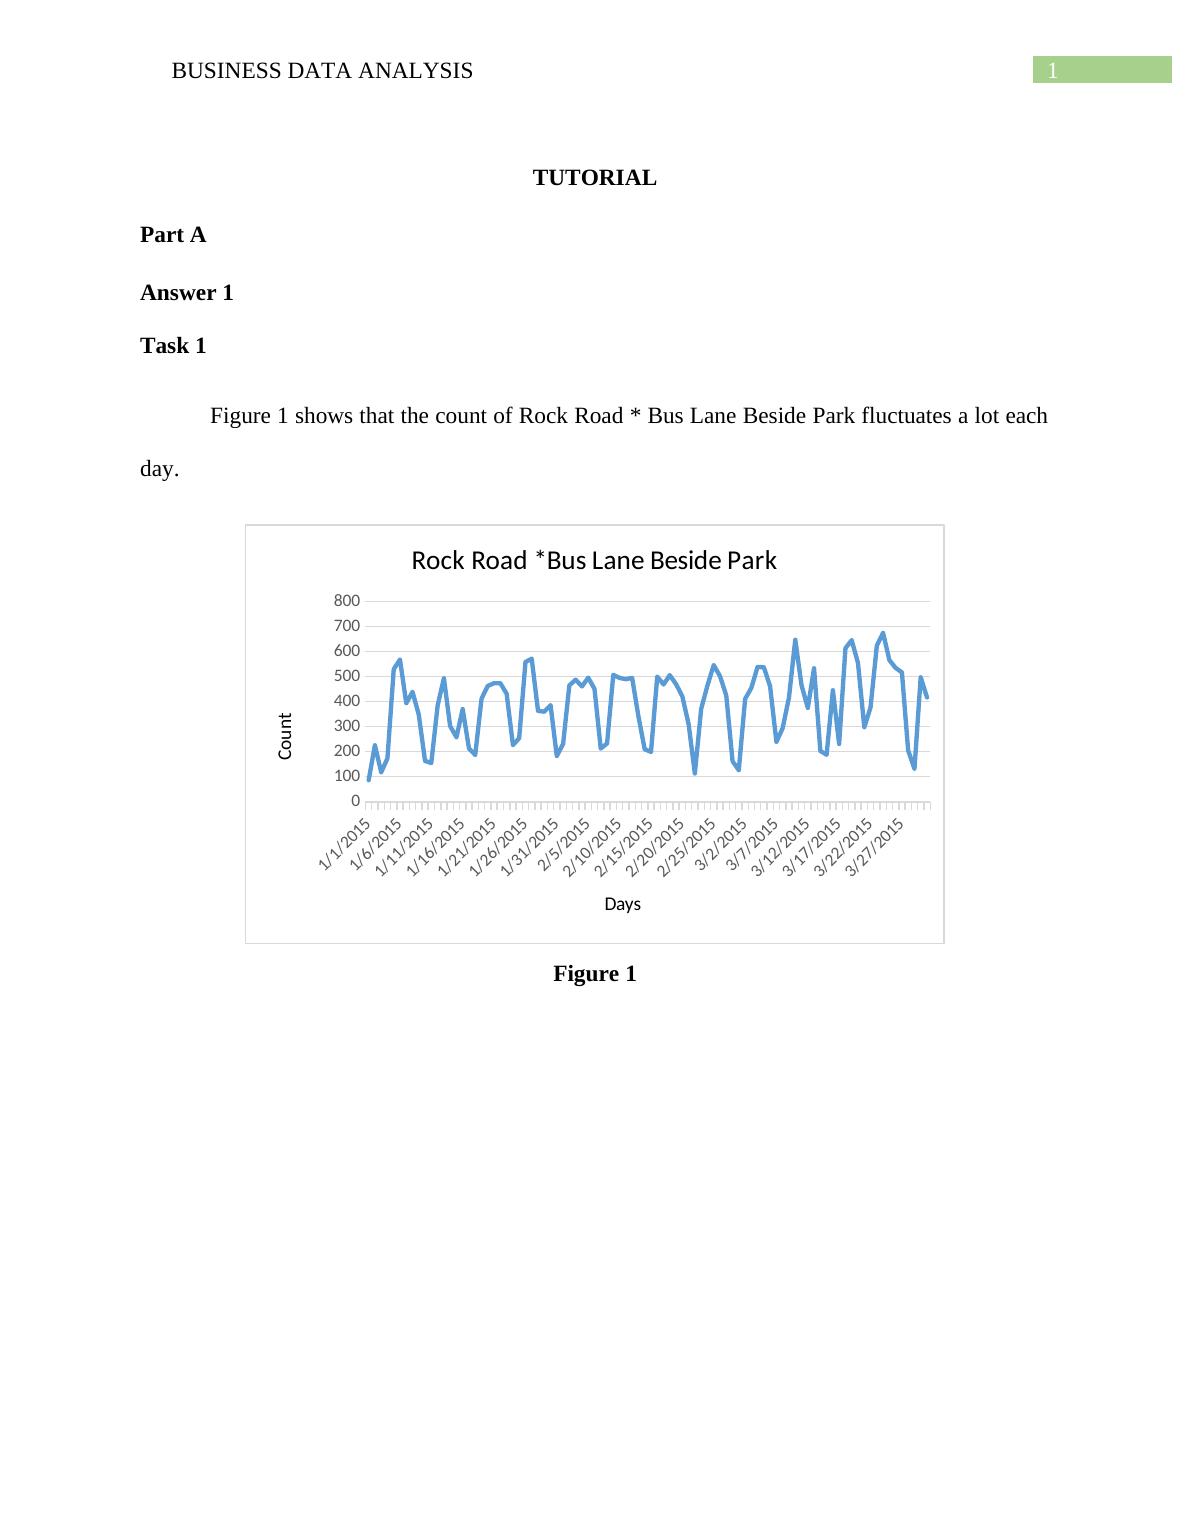 Assignment Report on Business Data Analysis_2